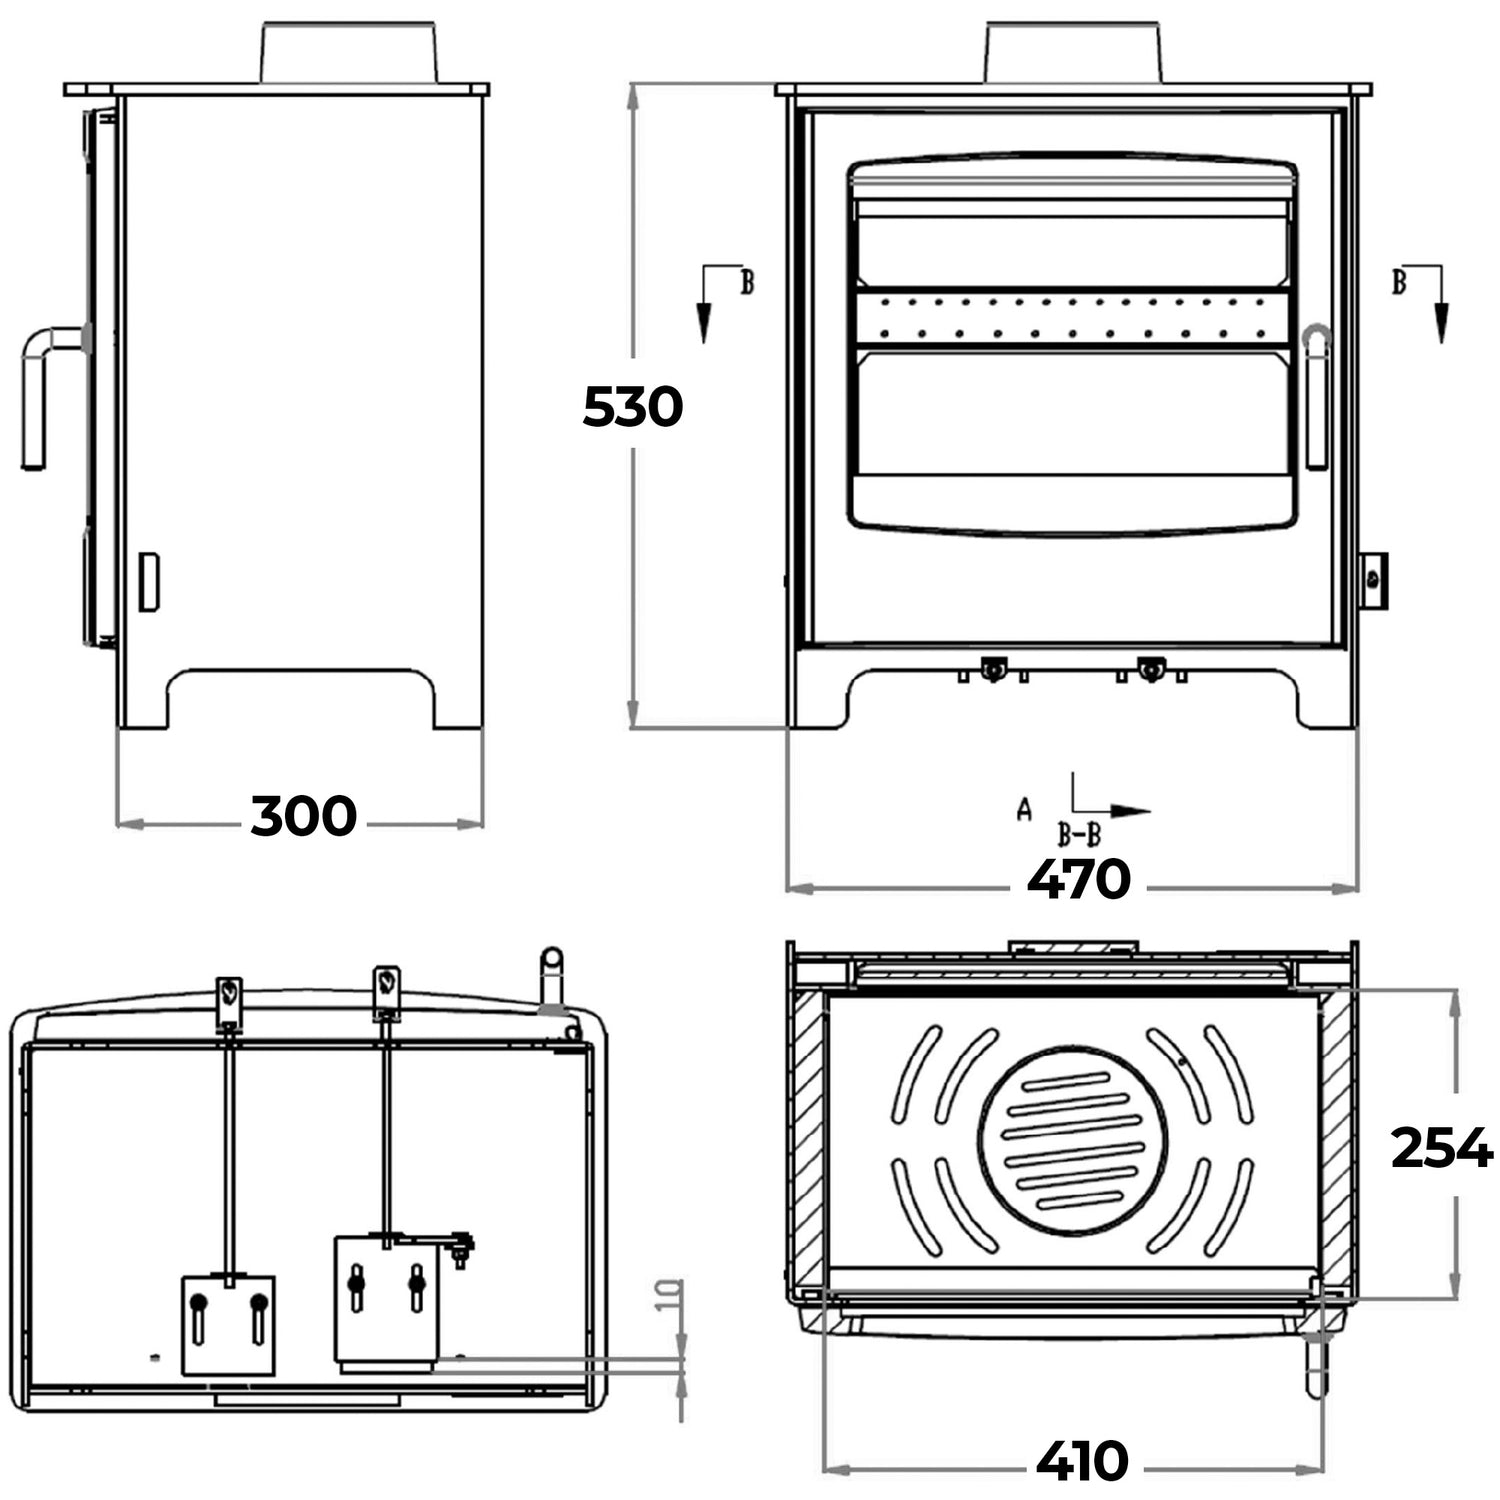 Dimensions and specifications for Large Solway Multifuel stove.